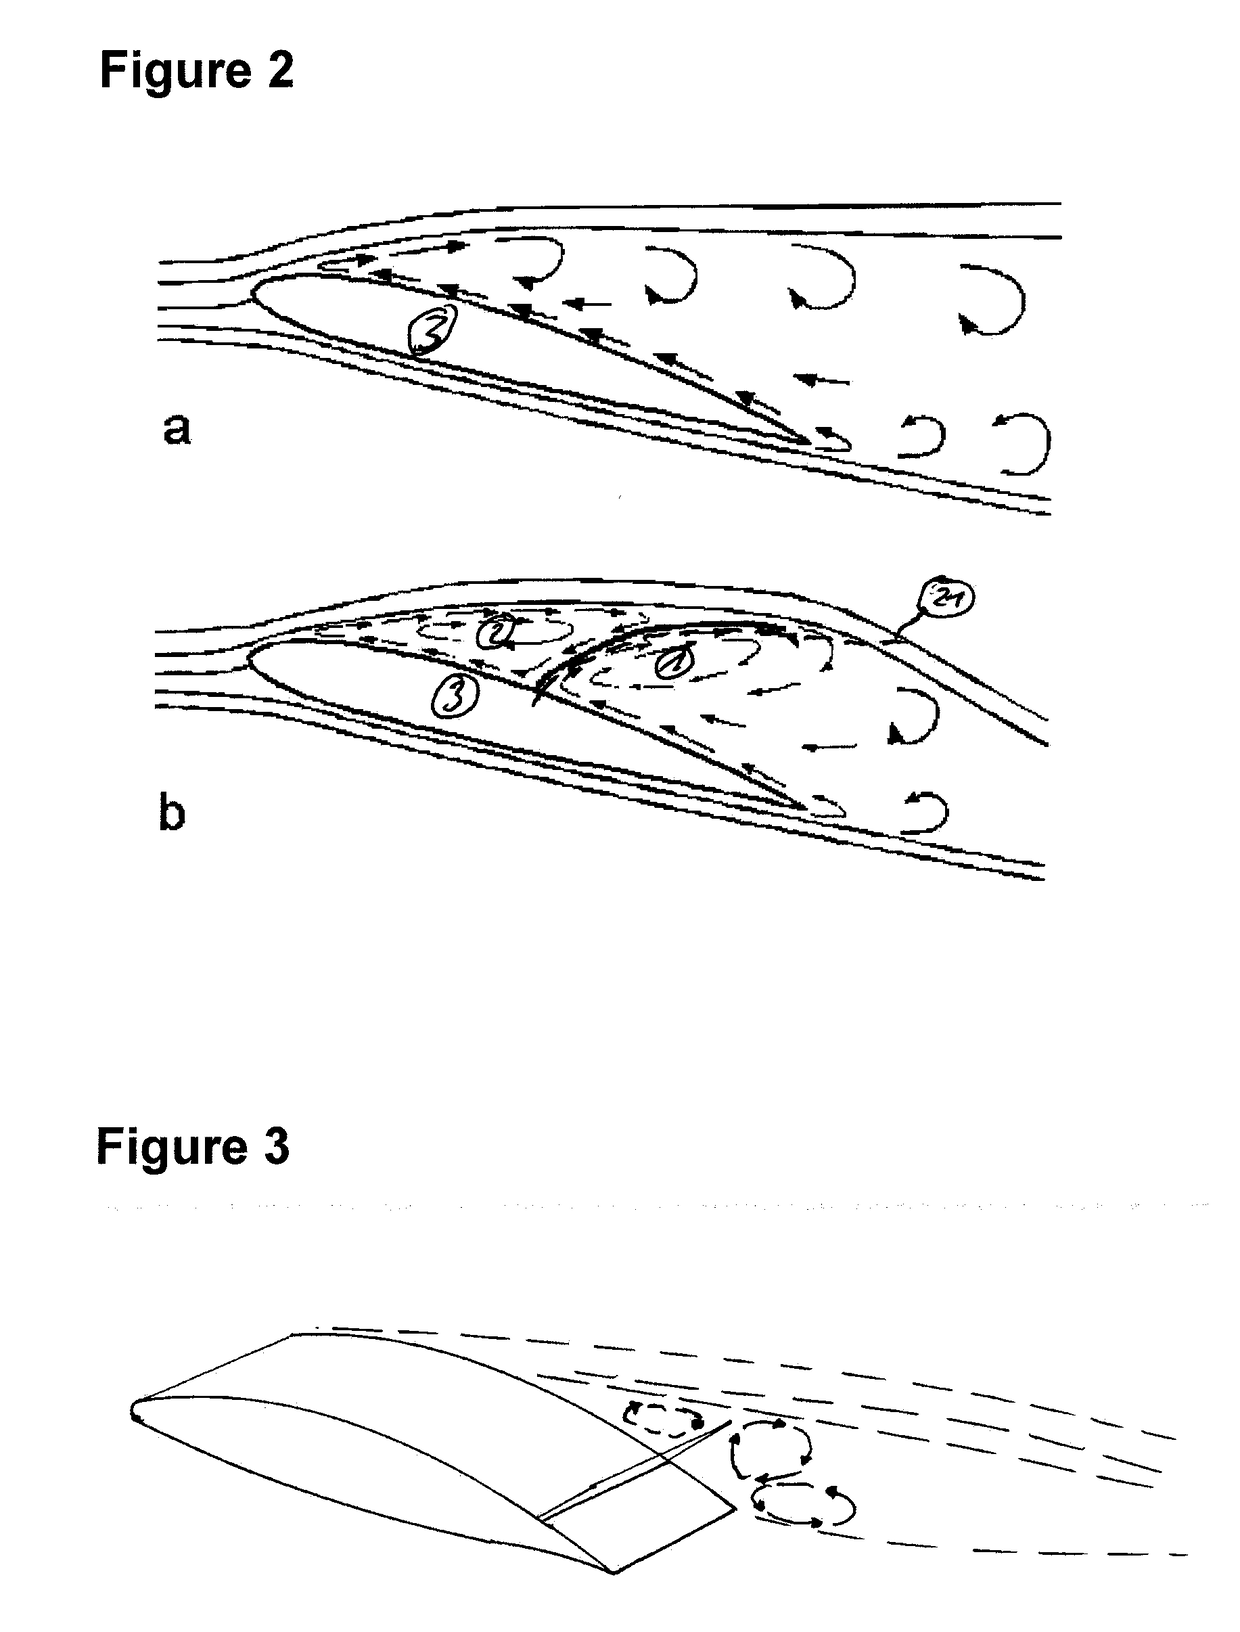 Multi-functional flap used as a back-flow flap